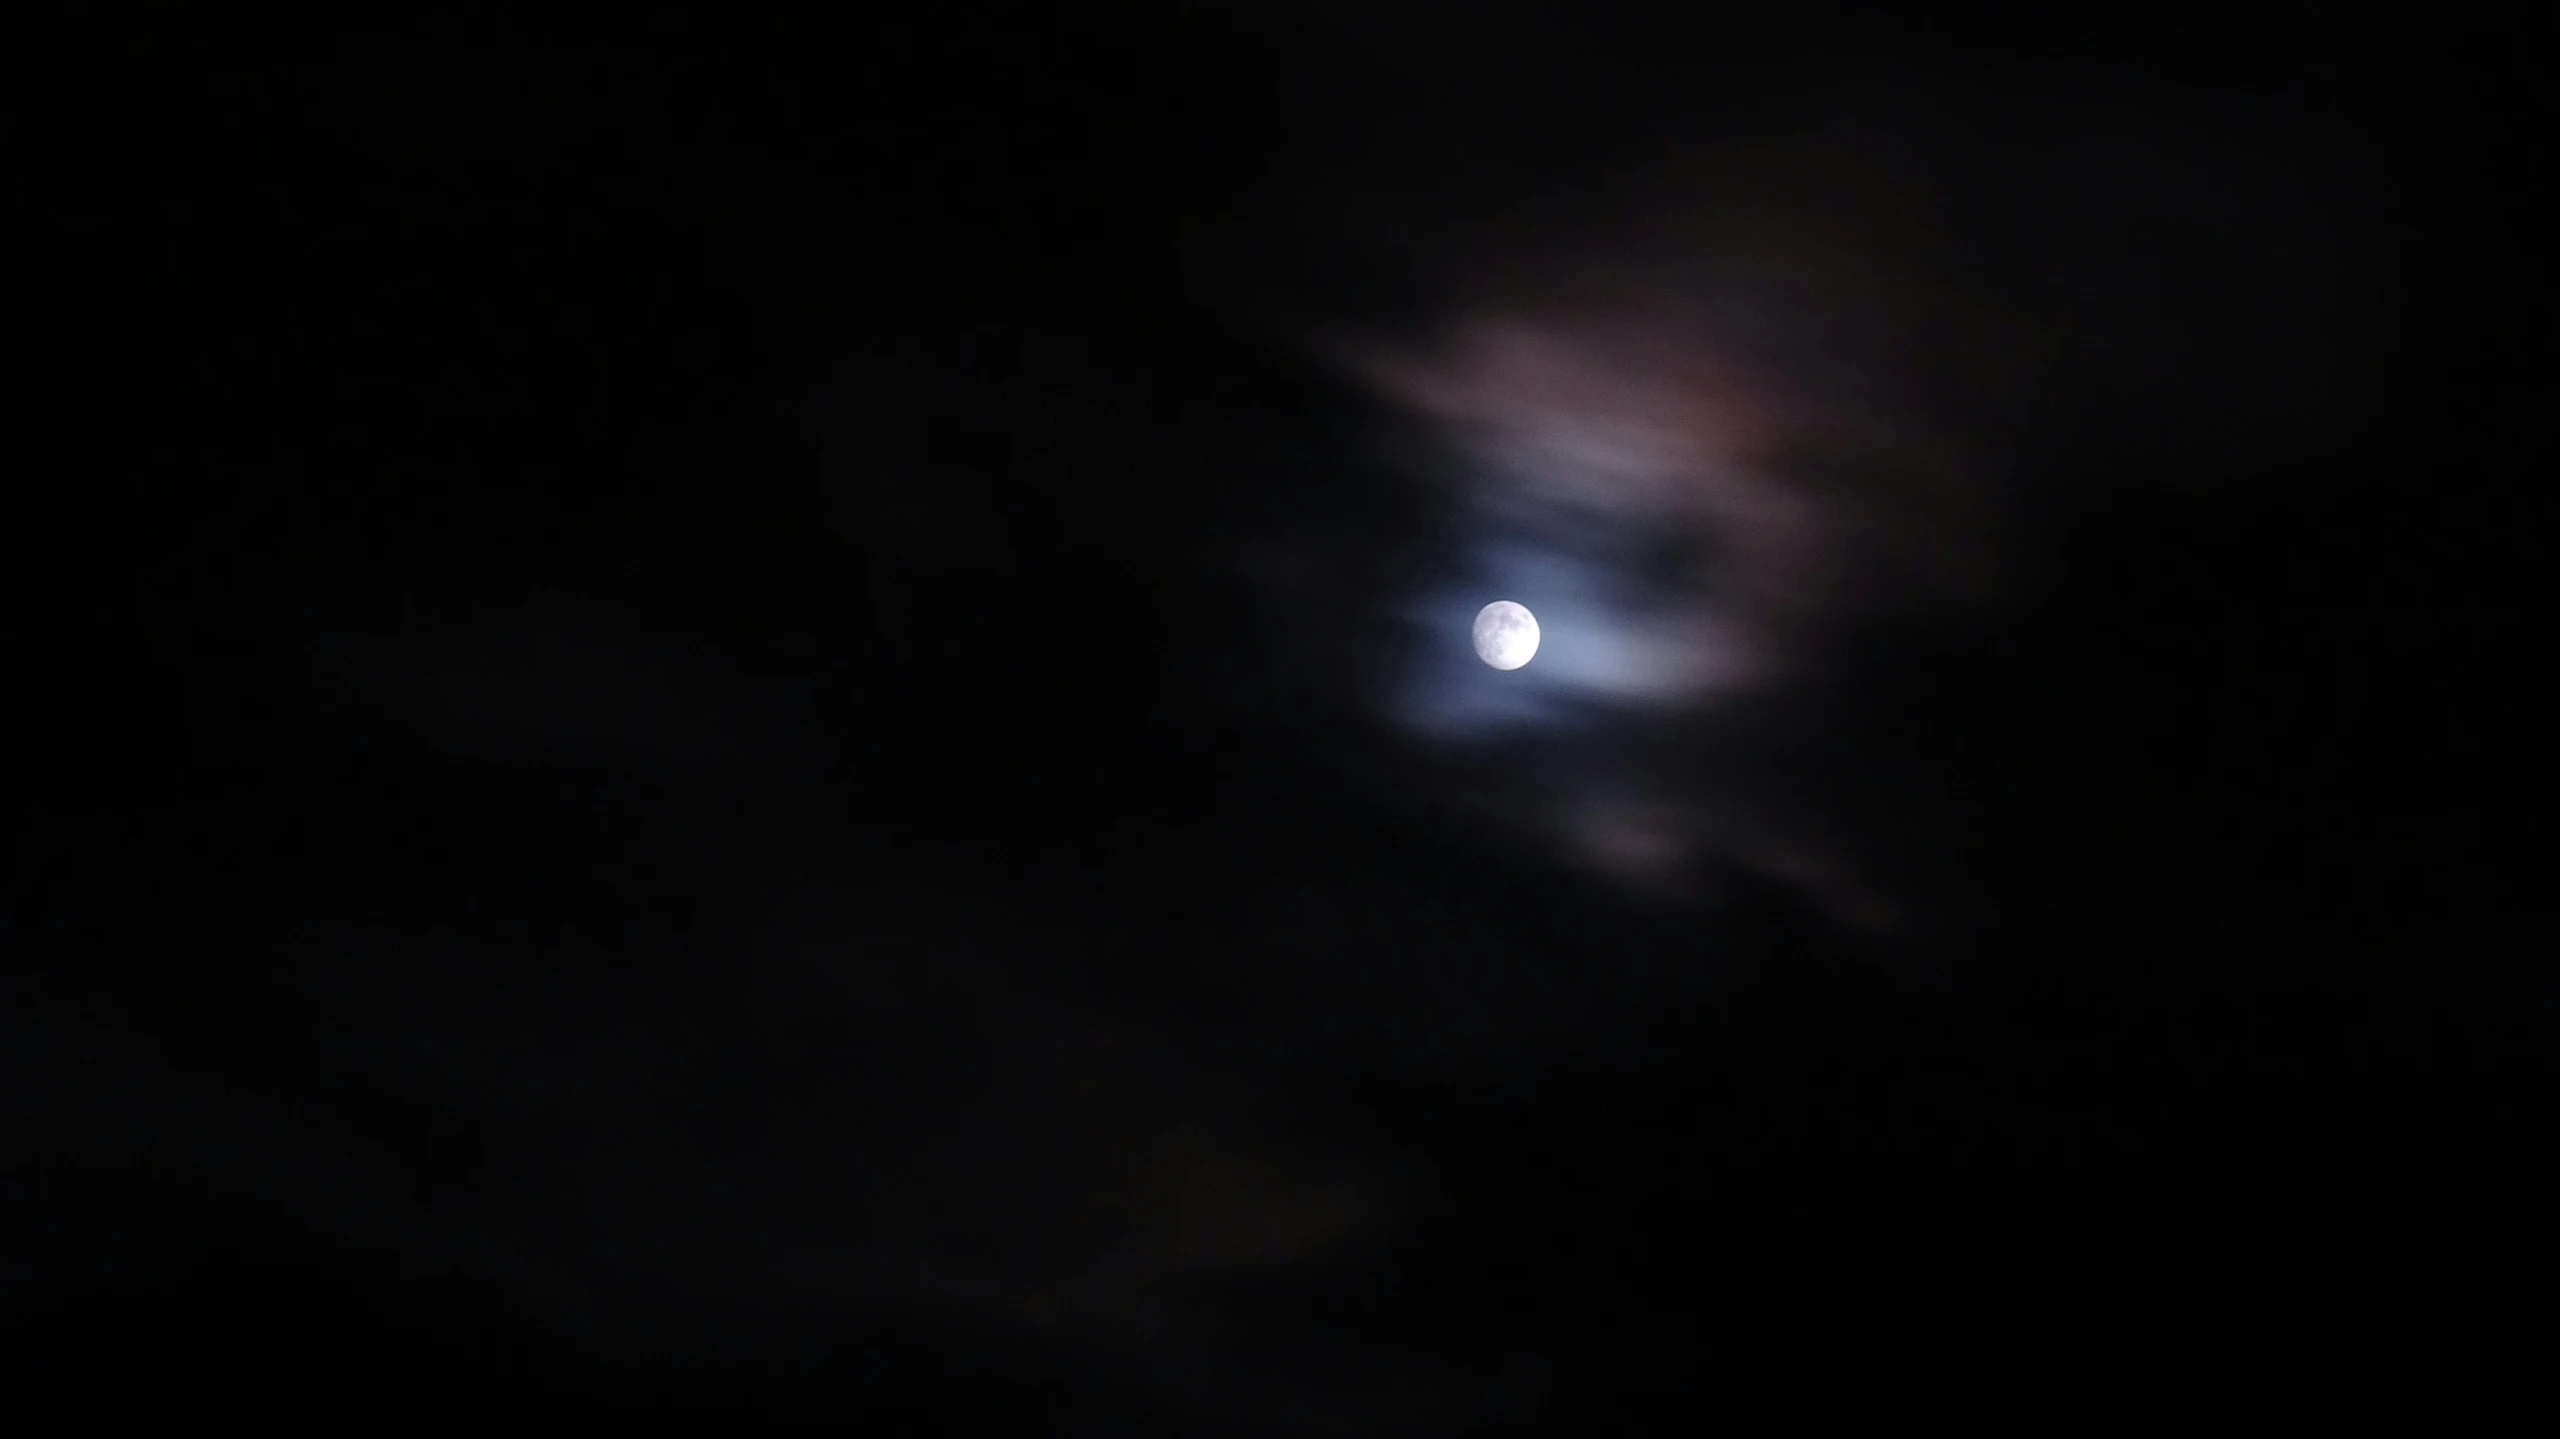 the moon is setting behind a cloud in the dark sky